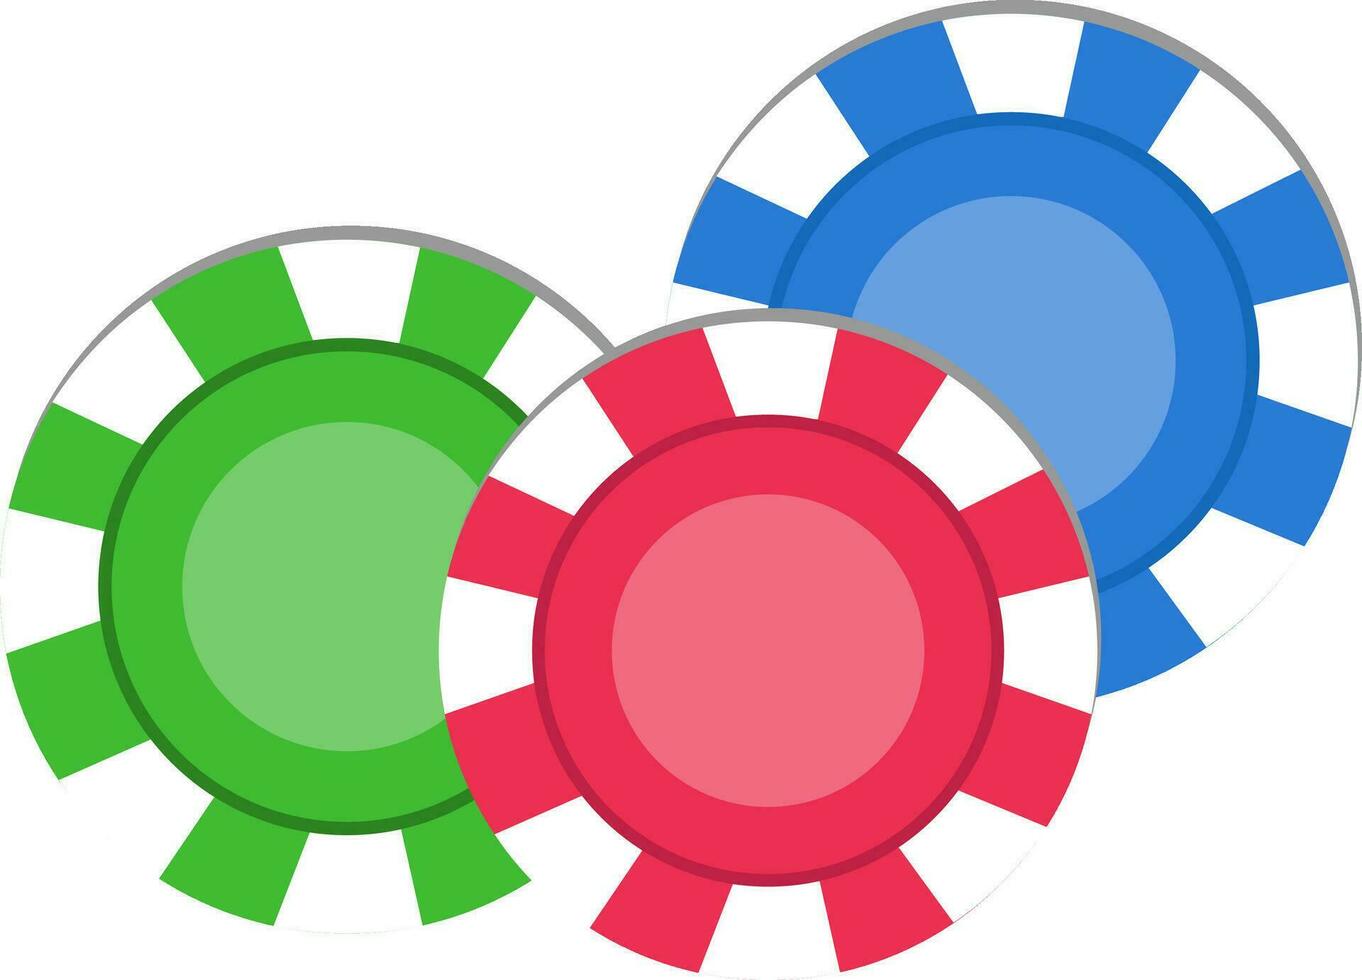 Colorful casino chips in flat style. vector